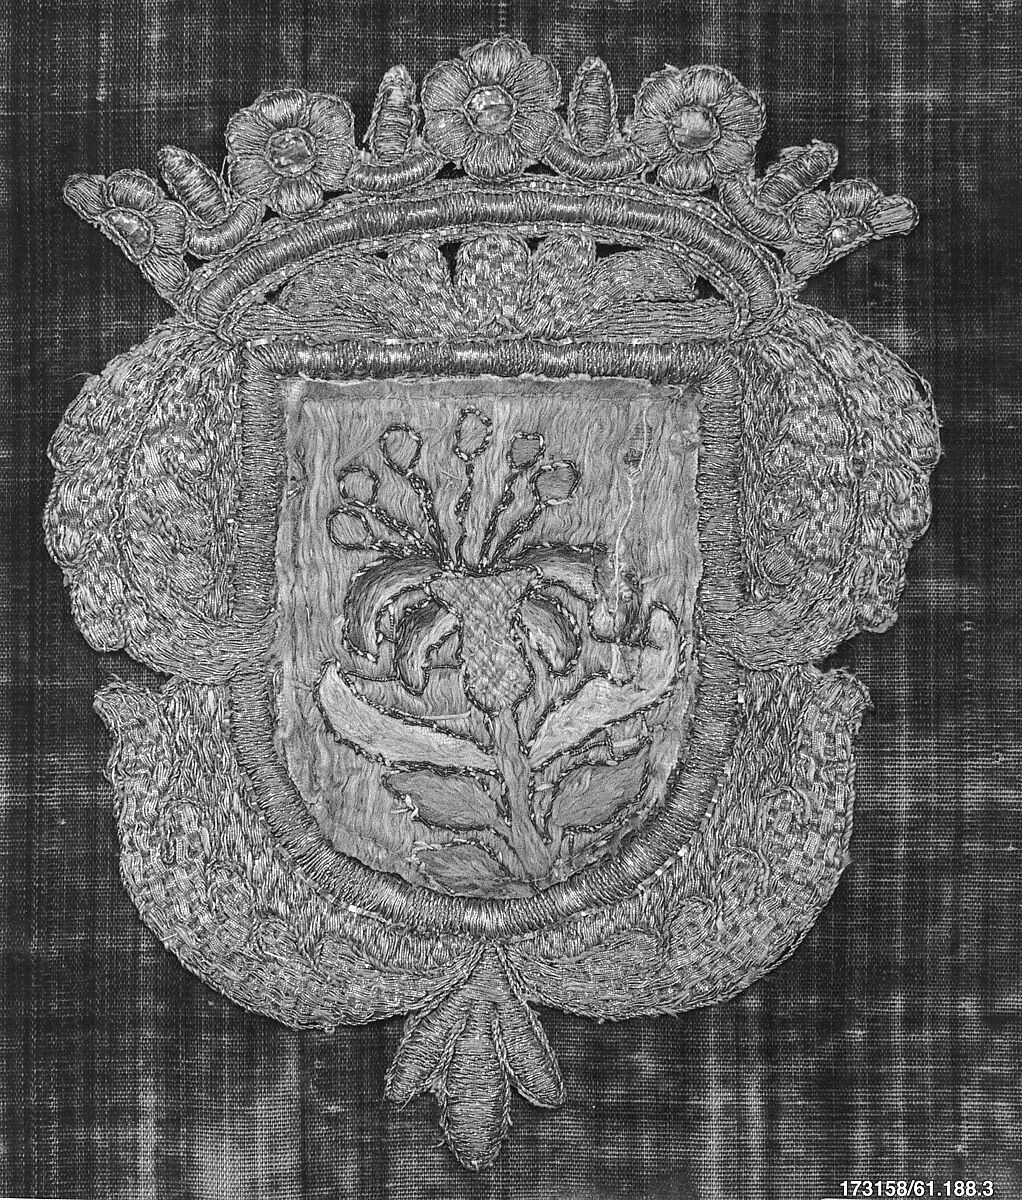 Coat of arms, Silk and metal thread, Spanish 